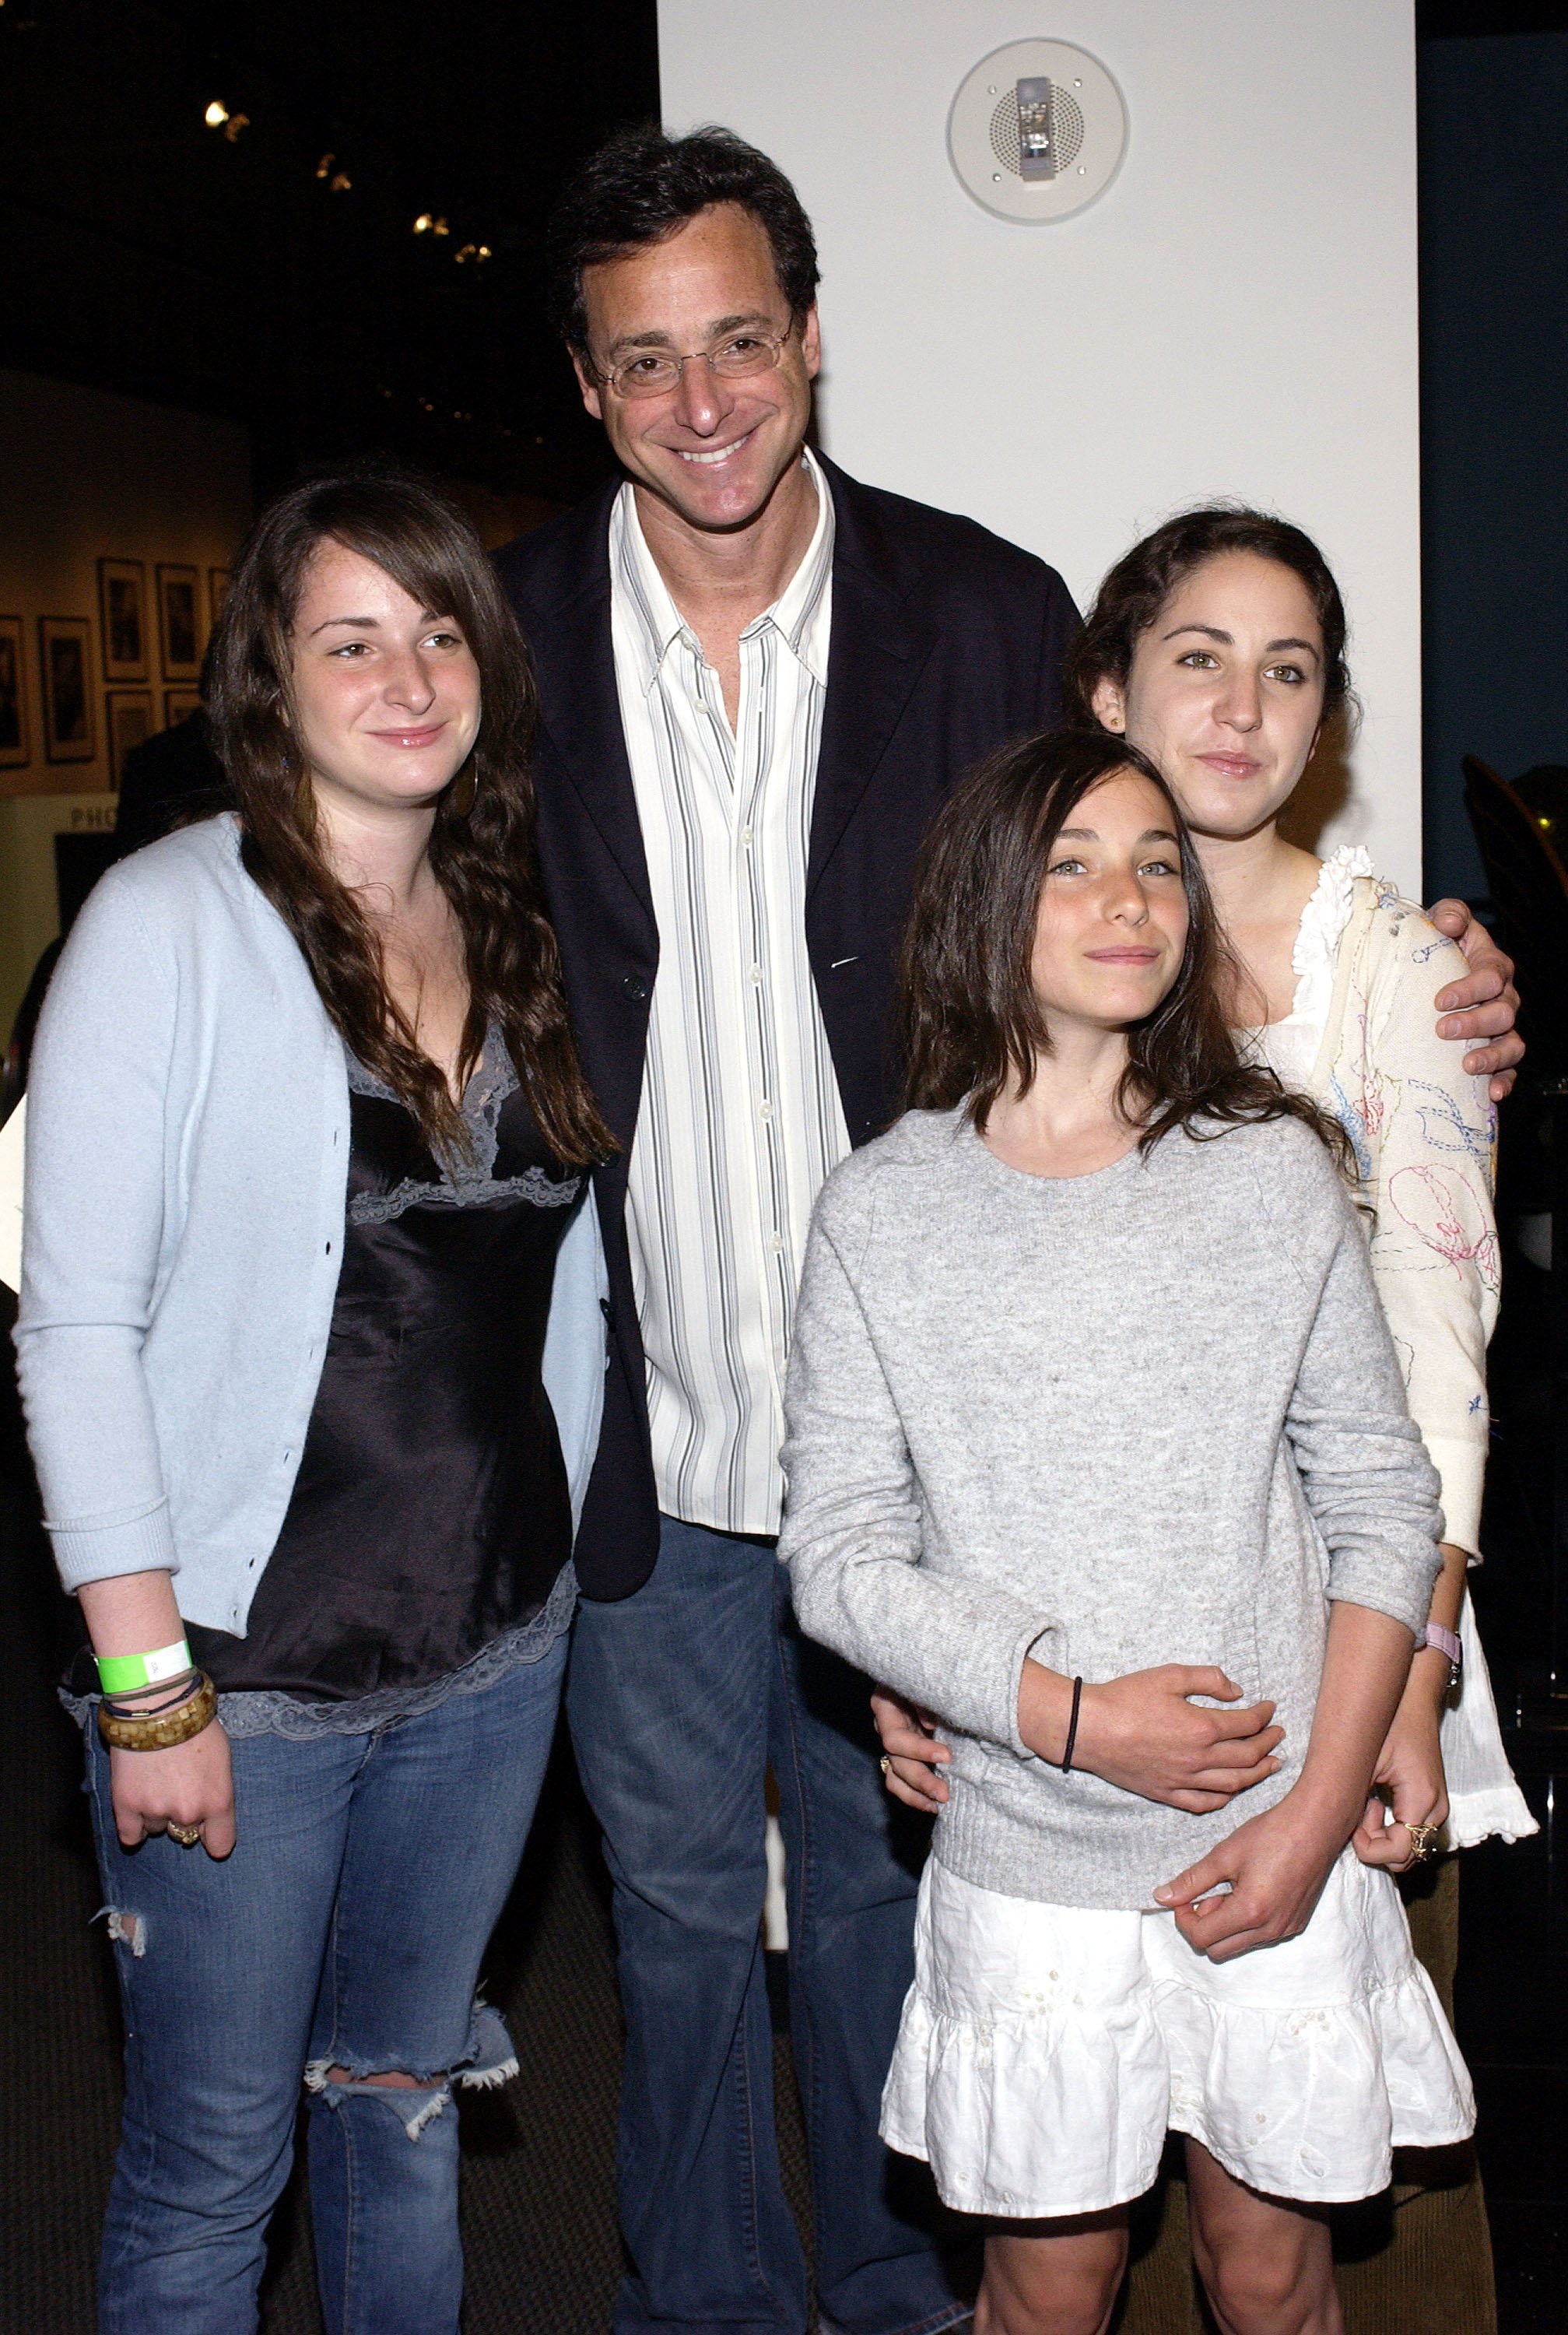 Bob Saget and his daughters Lara, Aubrey and Jennie at the Golden Dads Awards ceremony at the Peterson Automotive Museum on June 15, 2005. | Photo: GettyImages